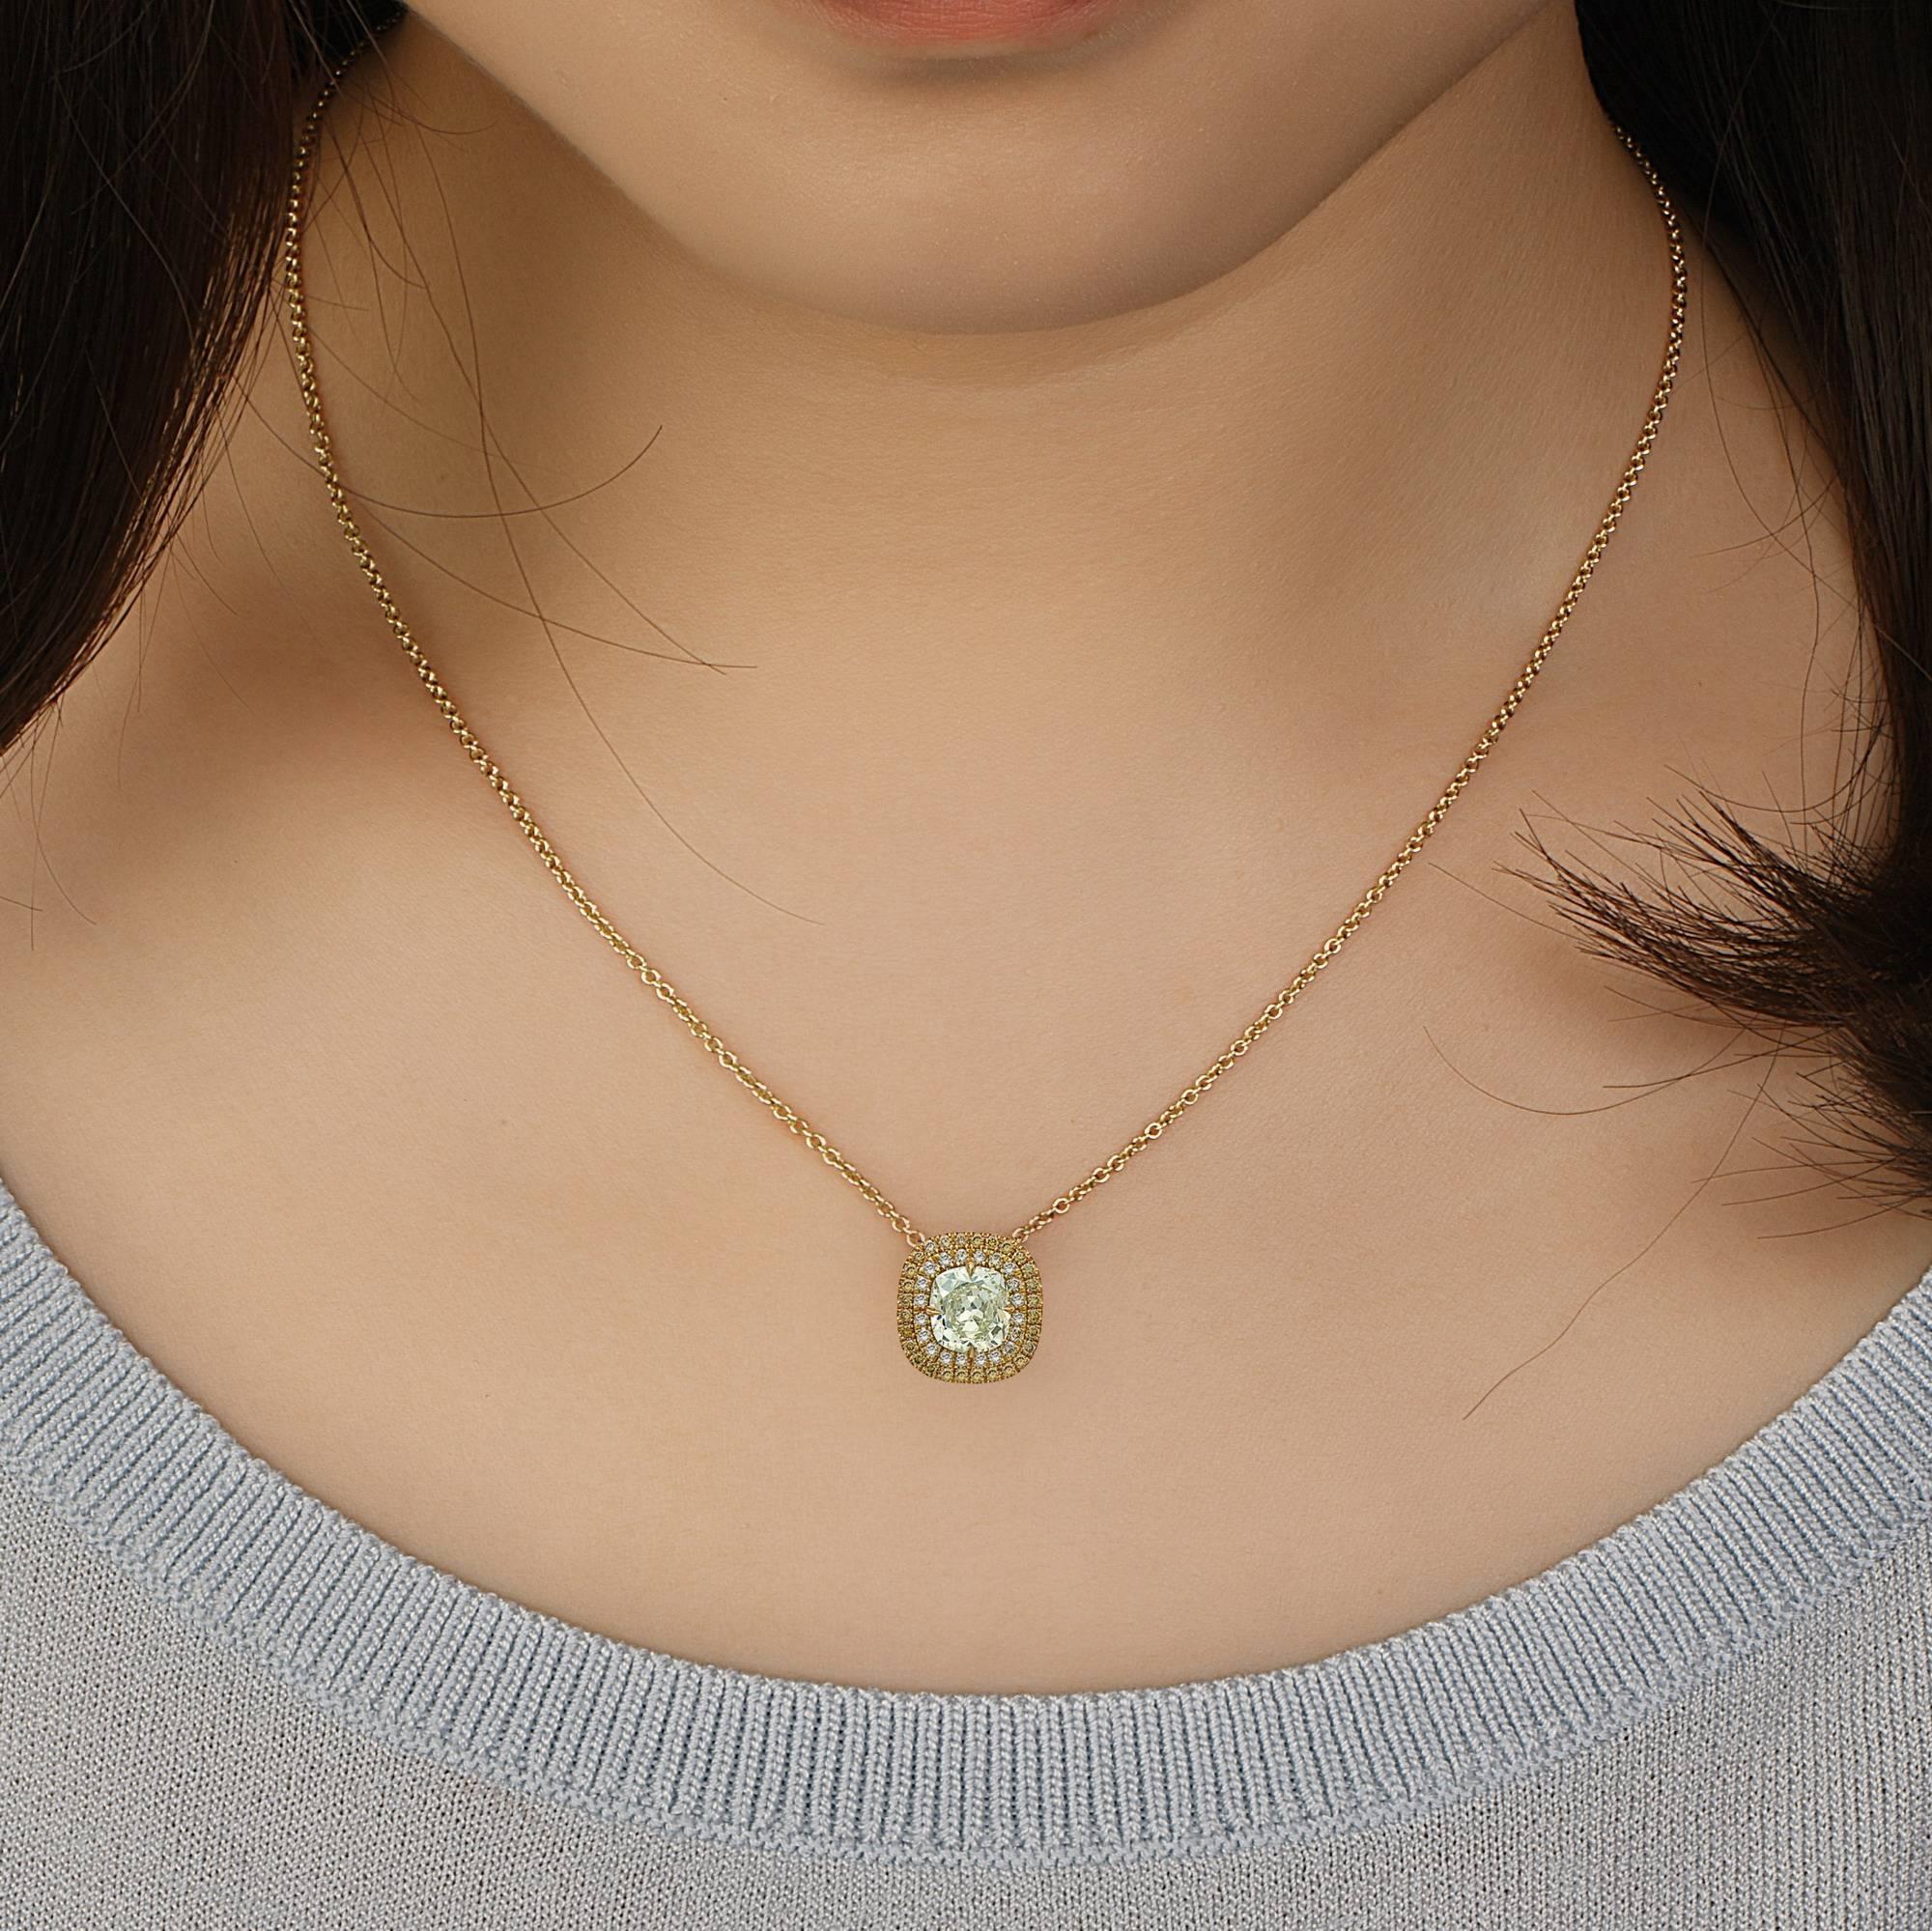 1.40 Carat GIA Certified center diamond Fancy Greenish Yellow Cushion center, what a rare stone! .28ct of vivid yellow diamonds make the rest of this gorgeous necklace into a masterpiece. Please request the certificate if interested. Set in 18K